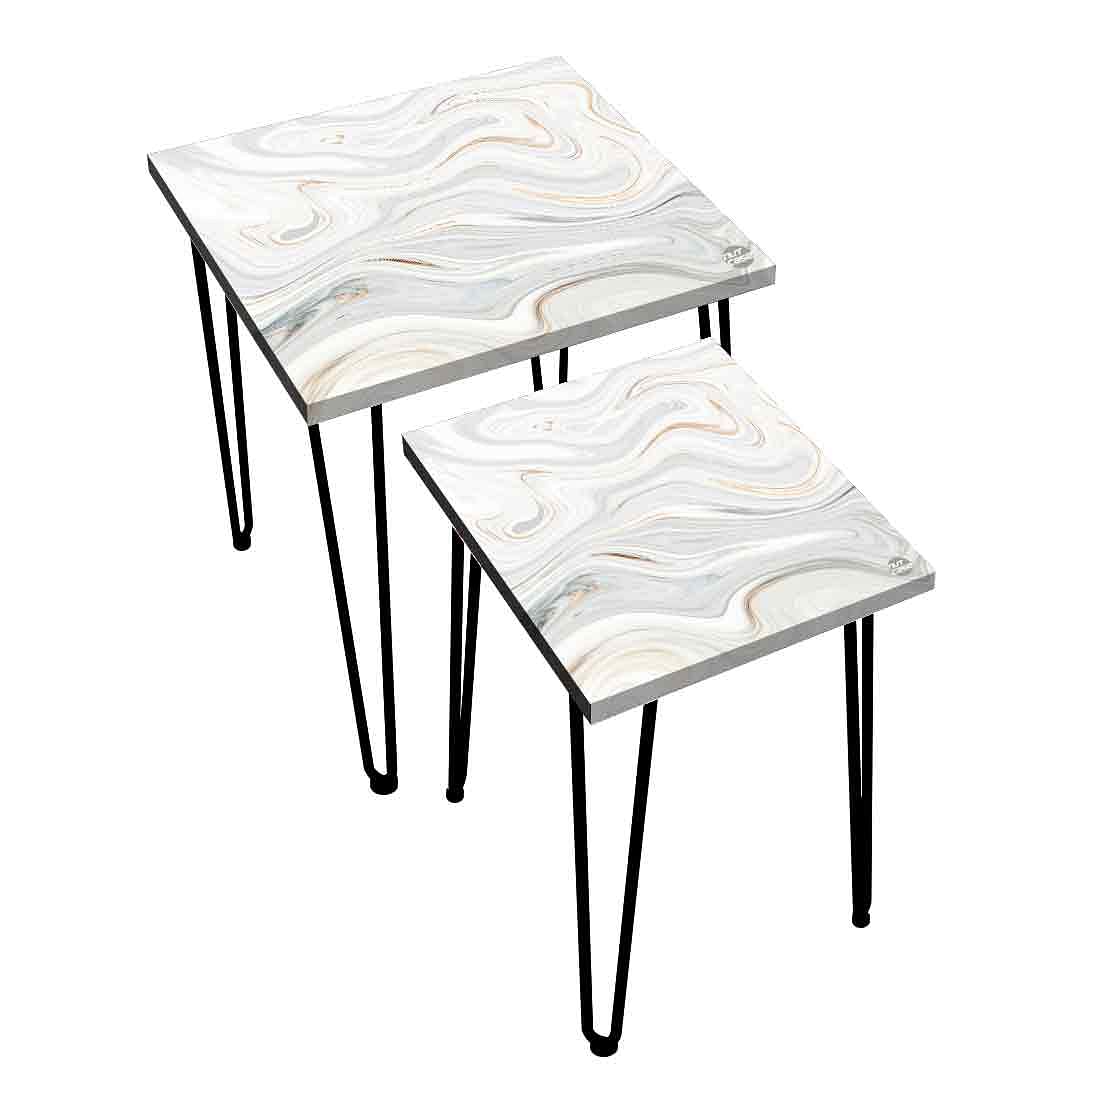 Marble Nesting Coffee Tables Set of 2 Side Table for Living Room - White Swirl Nutcase